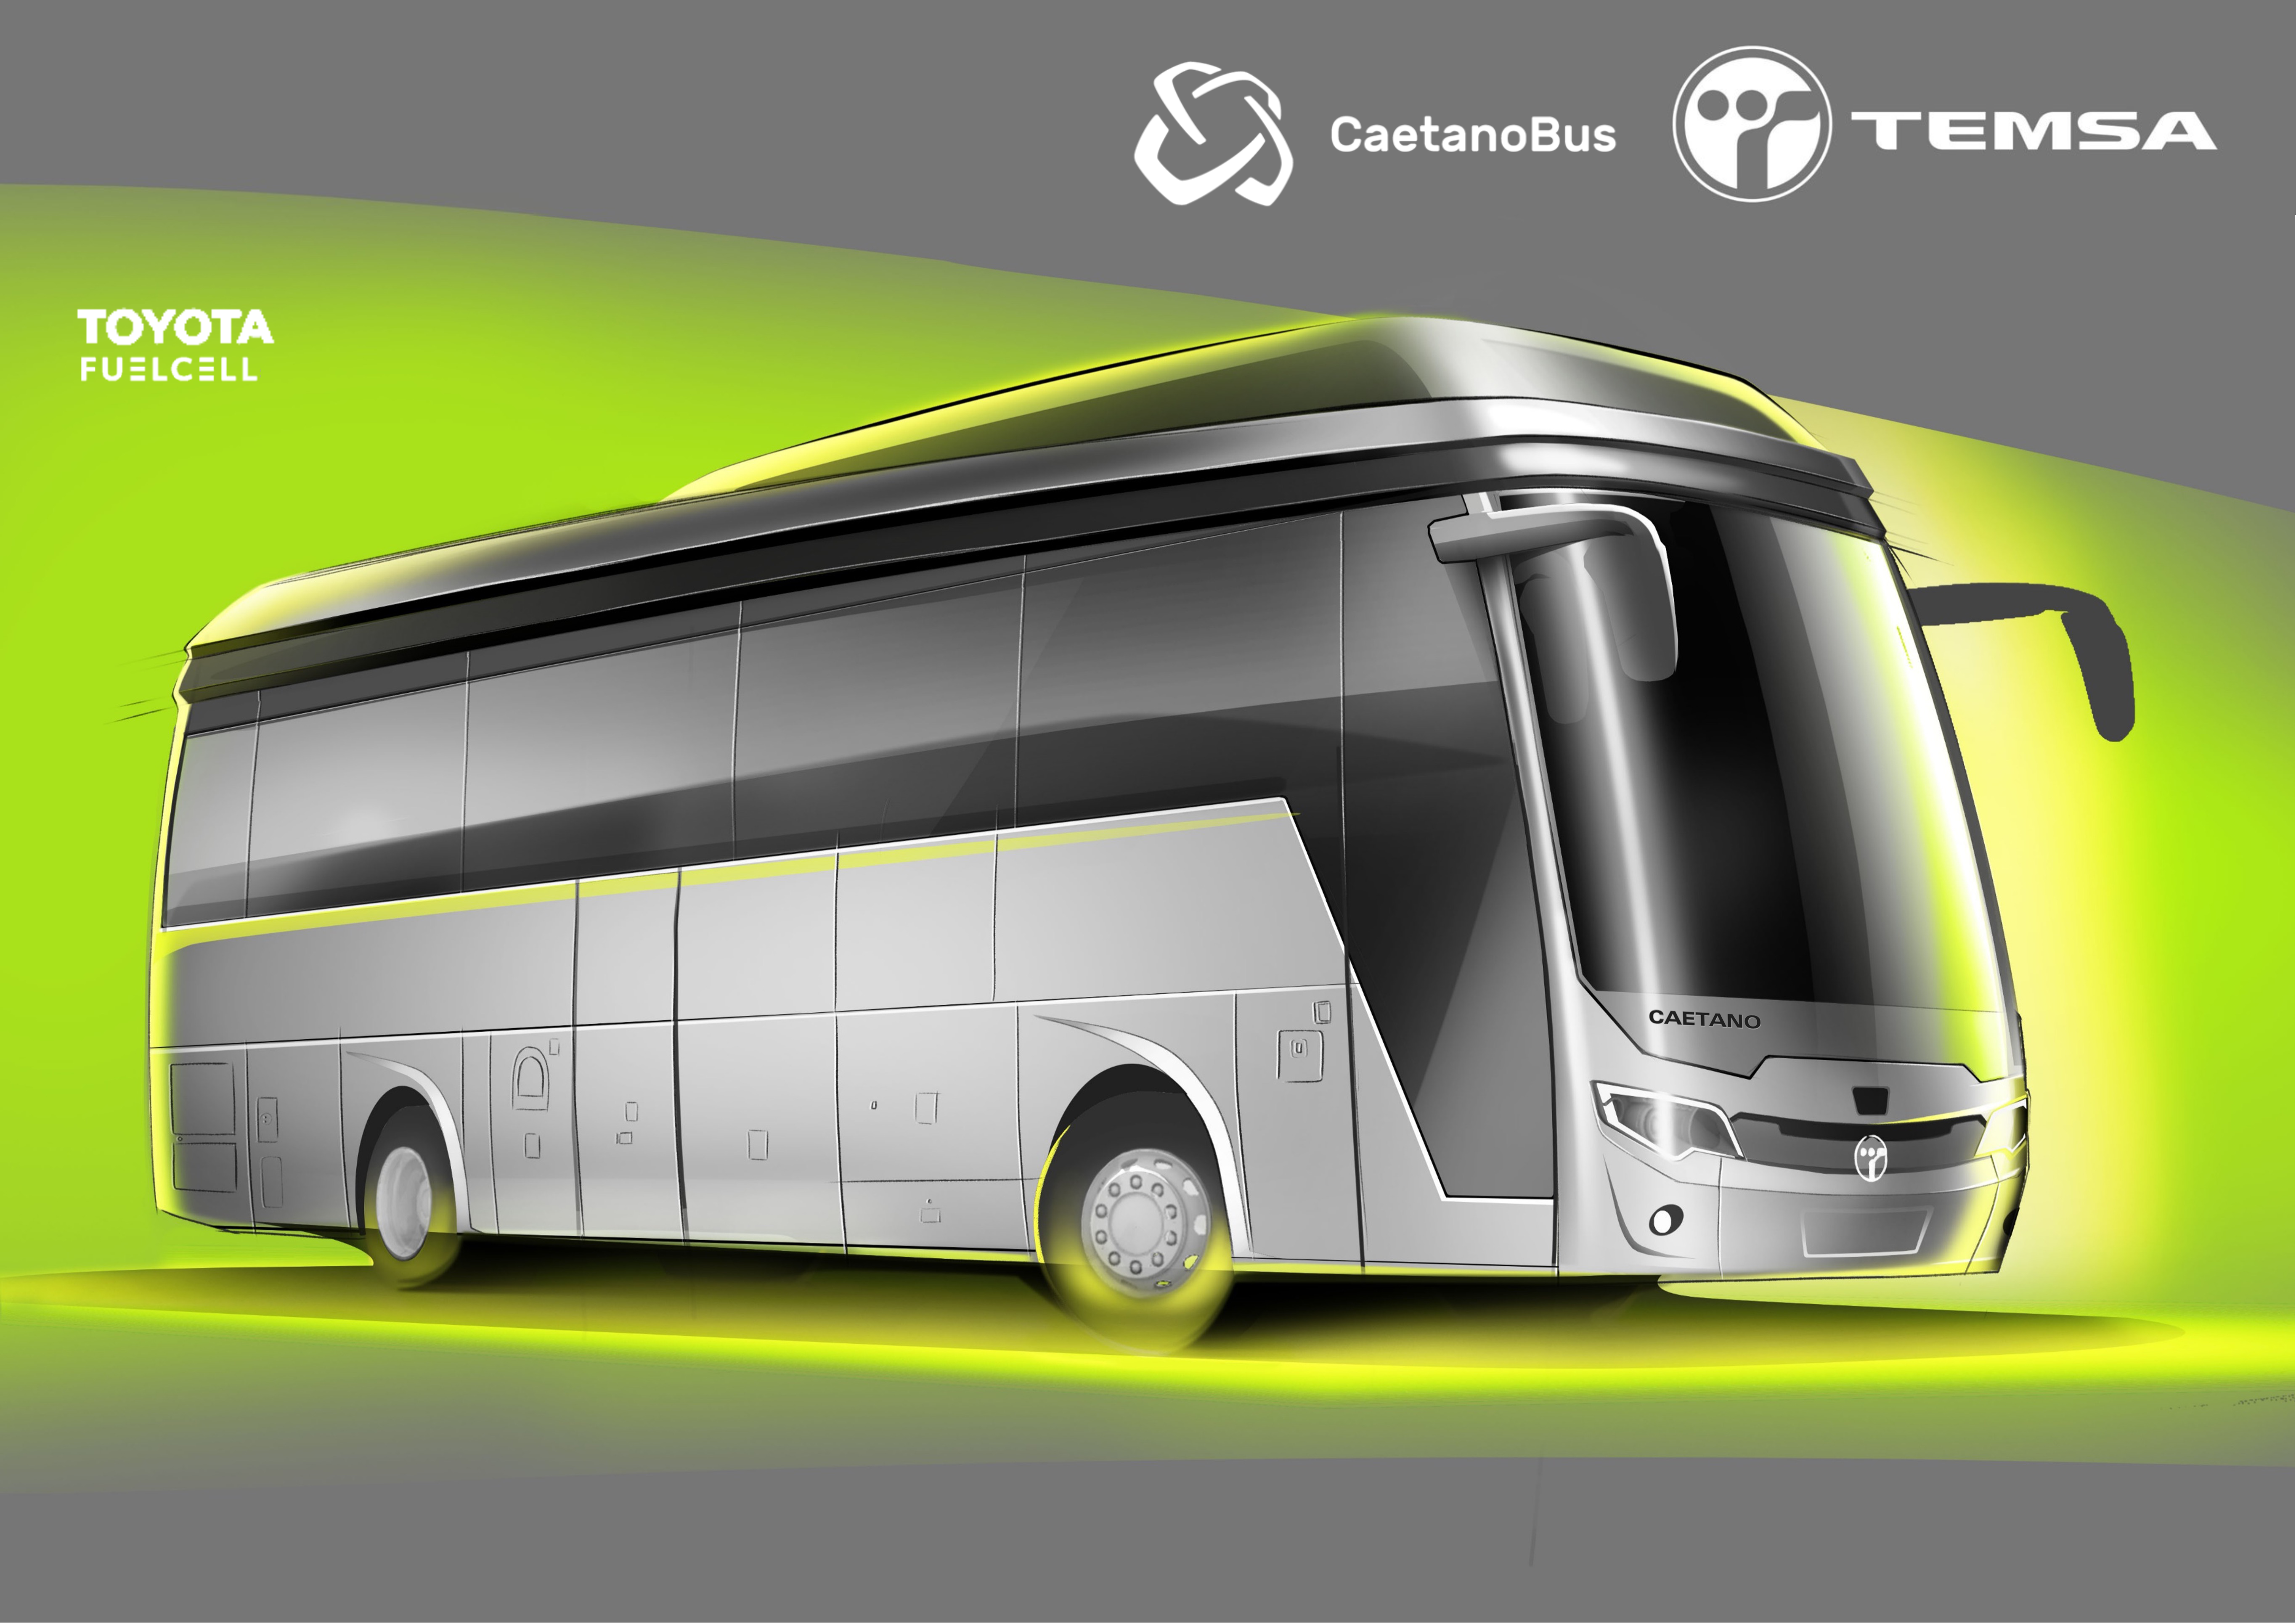 Caetano and Temsa team up for hydrogen coach